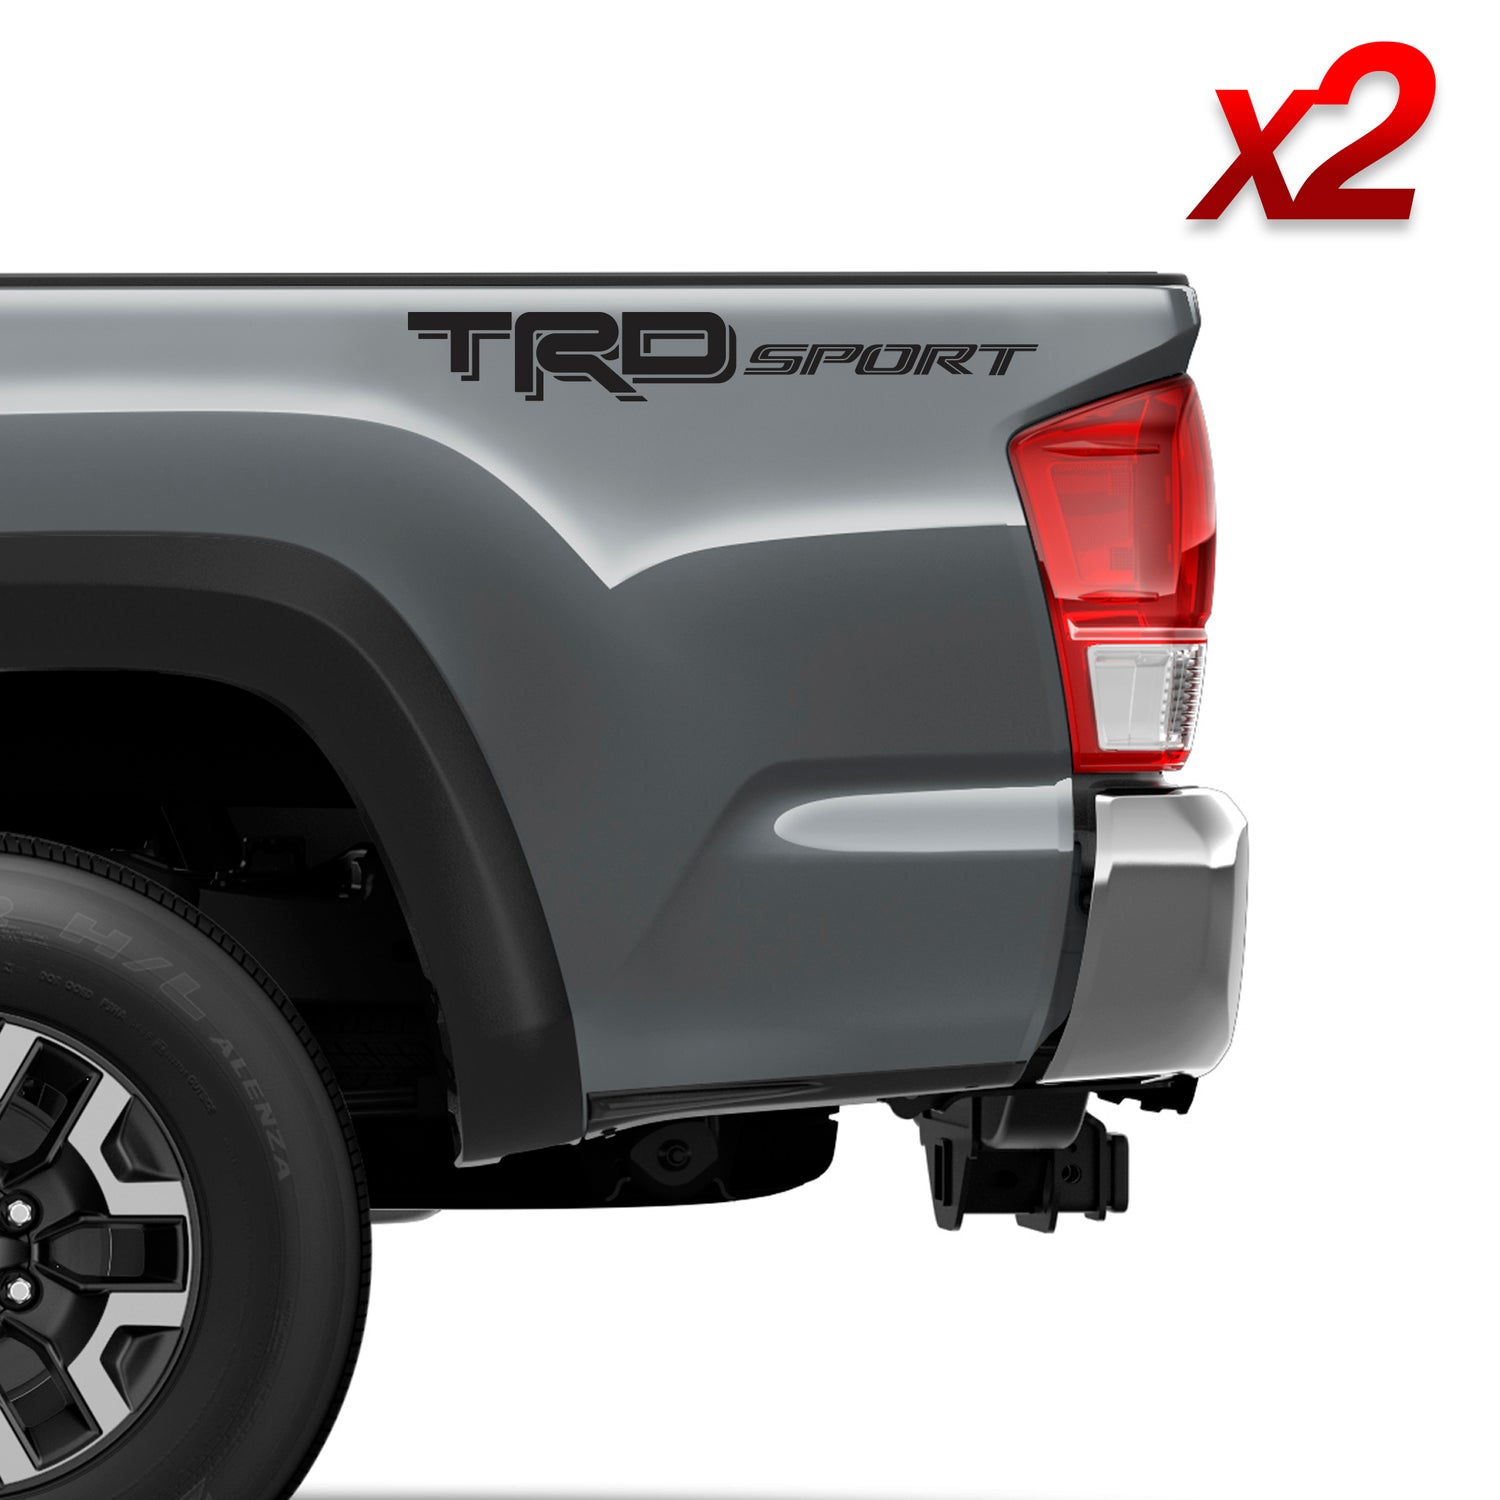 TRD Toyota Truck Tacoma 4x4 Sport with Shadow Vinyl Decals (2 Sets)